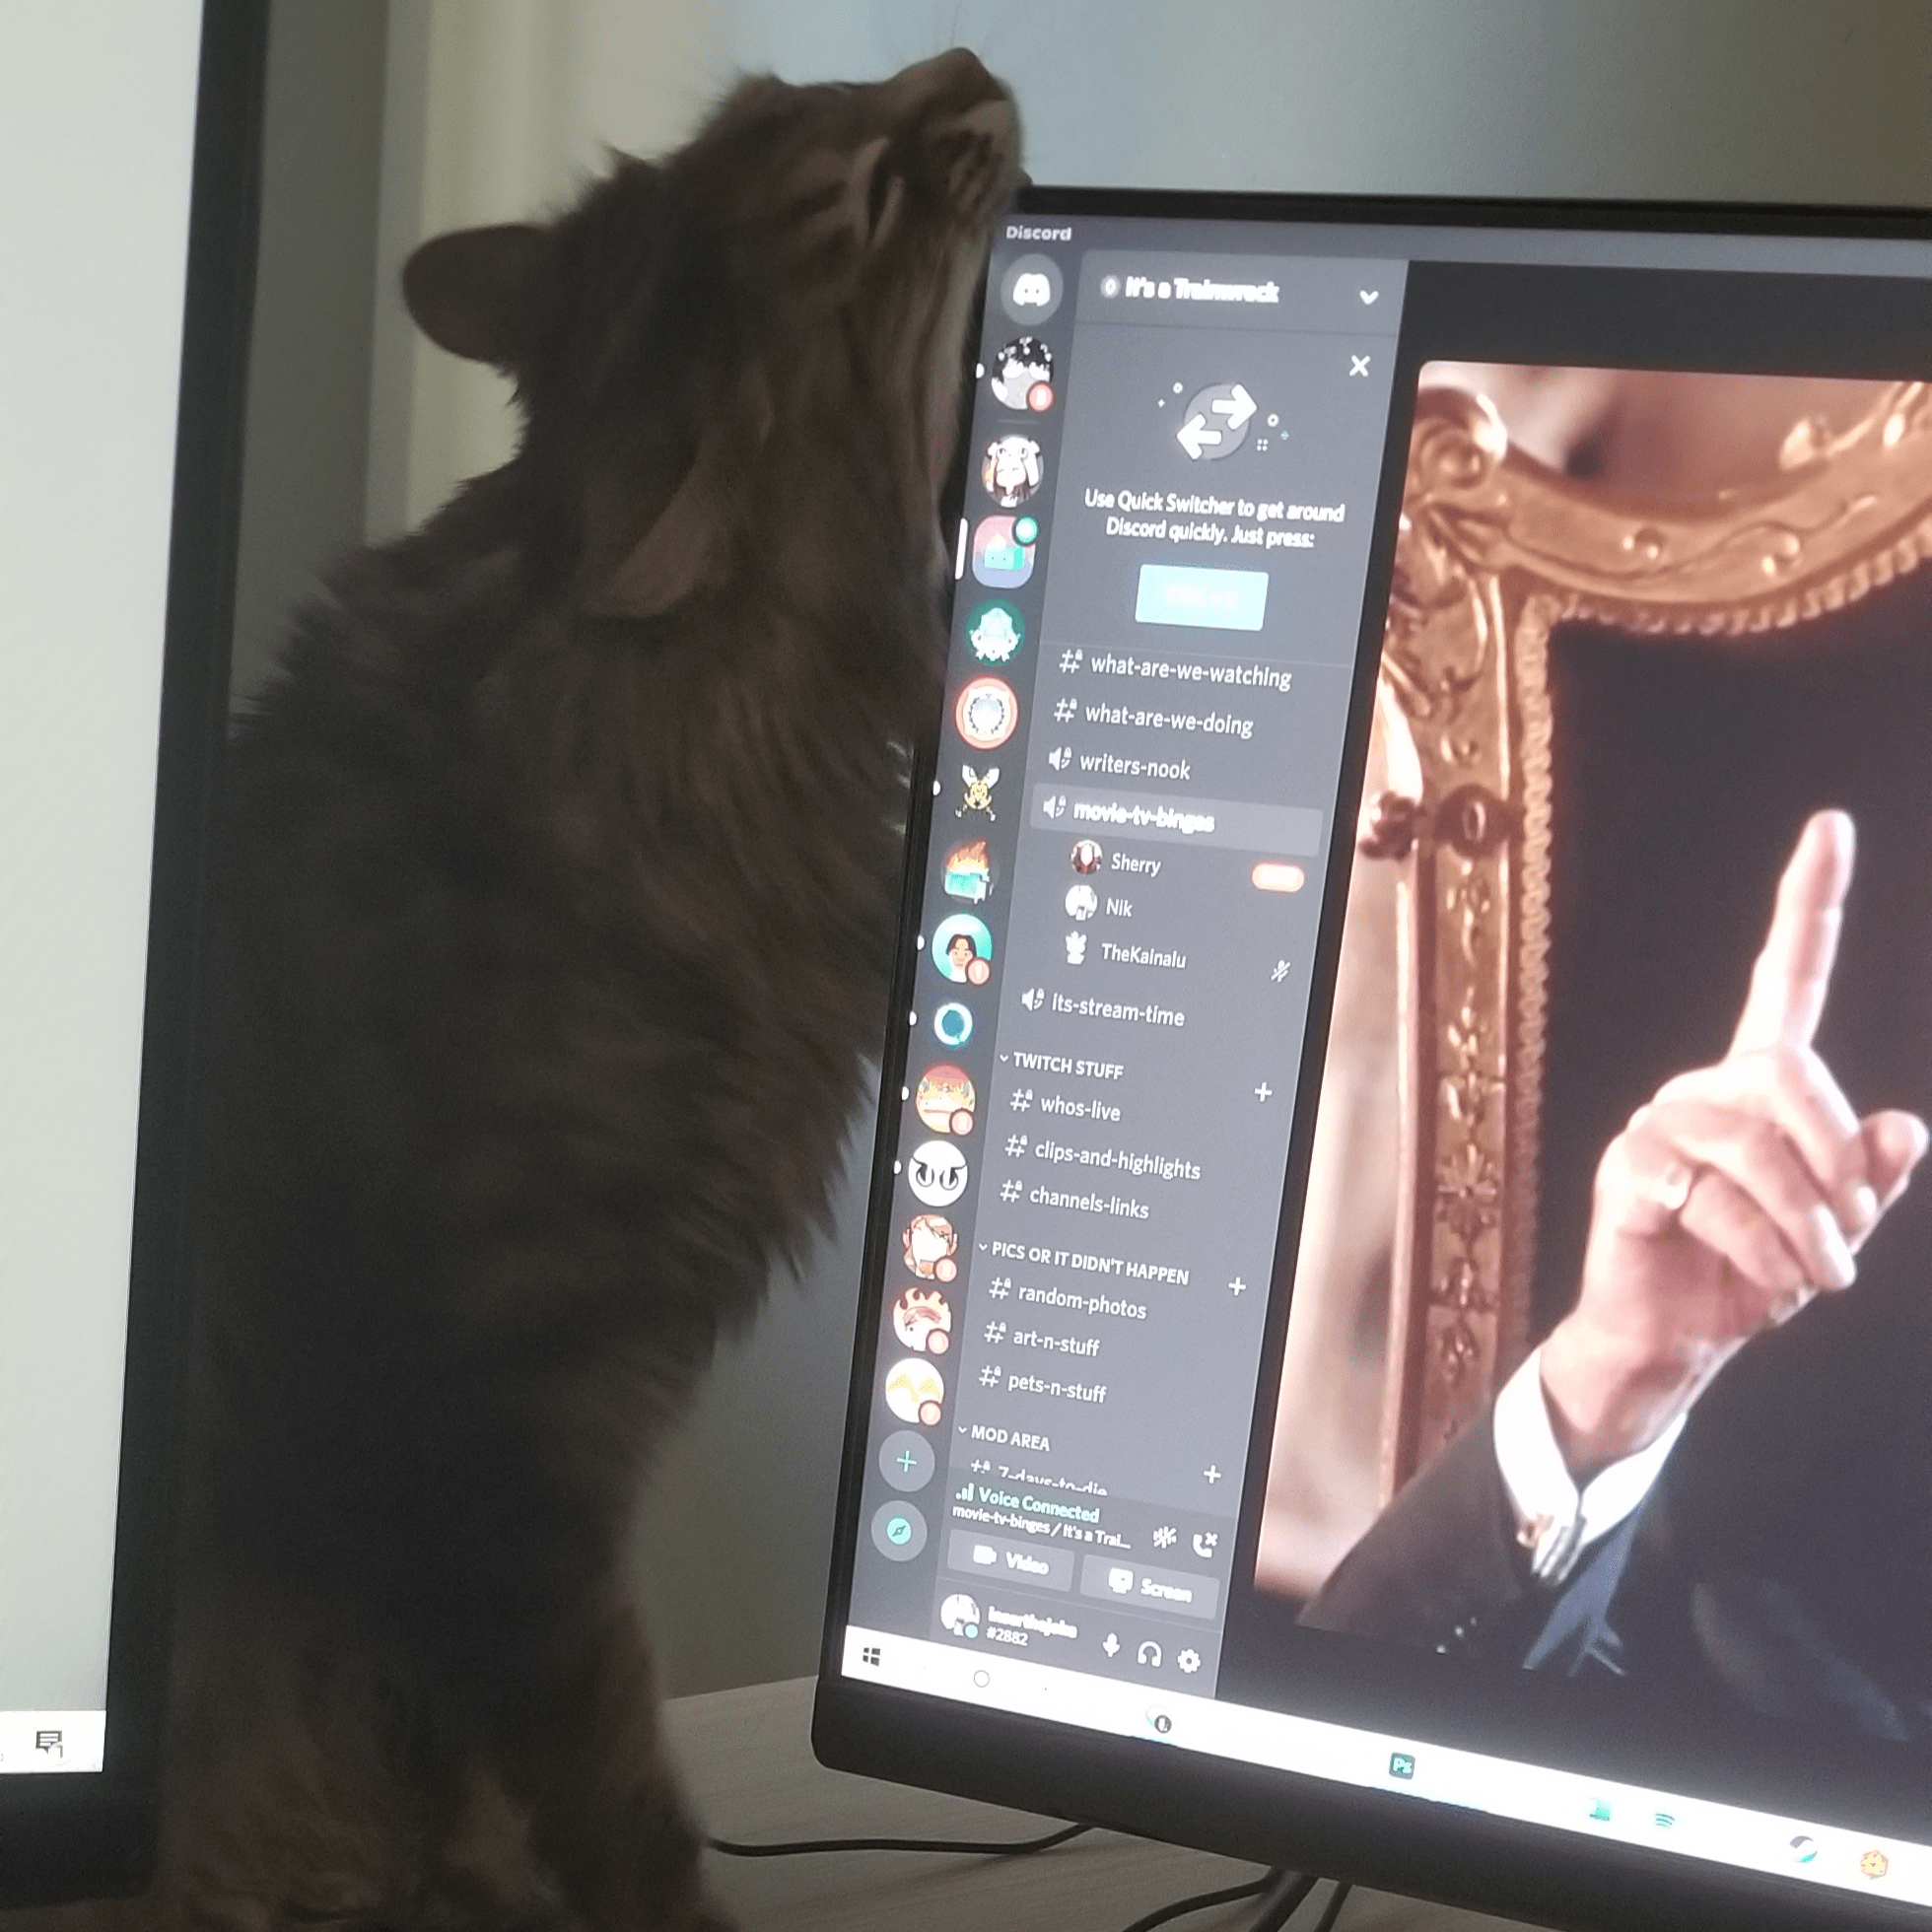 Arti the cat about to destroy a computer monitor